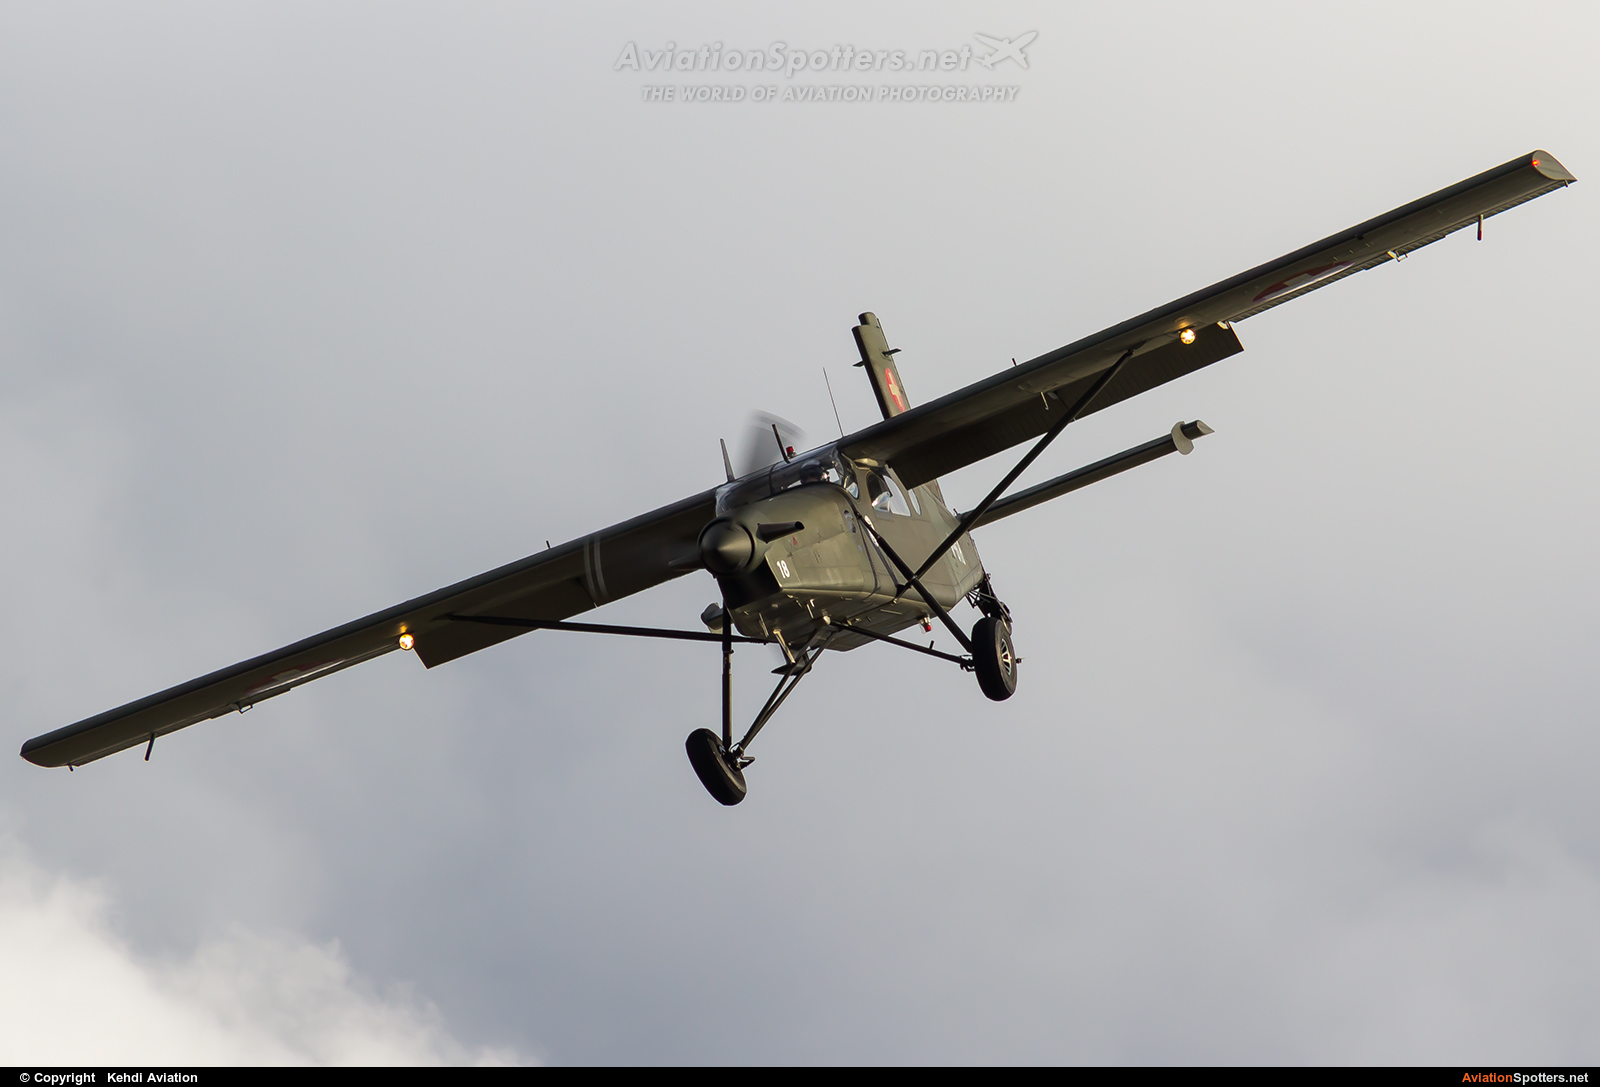 Switzerland - Air Force  -  PC-6 Porter (all models)  (V-618) By Kehdi Aviation (Kehdi Aviation)